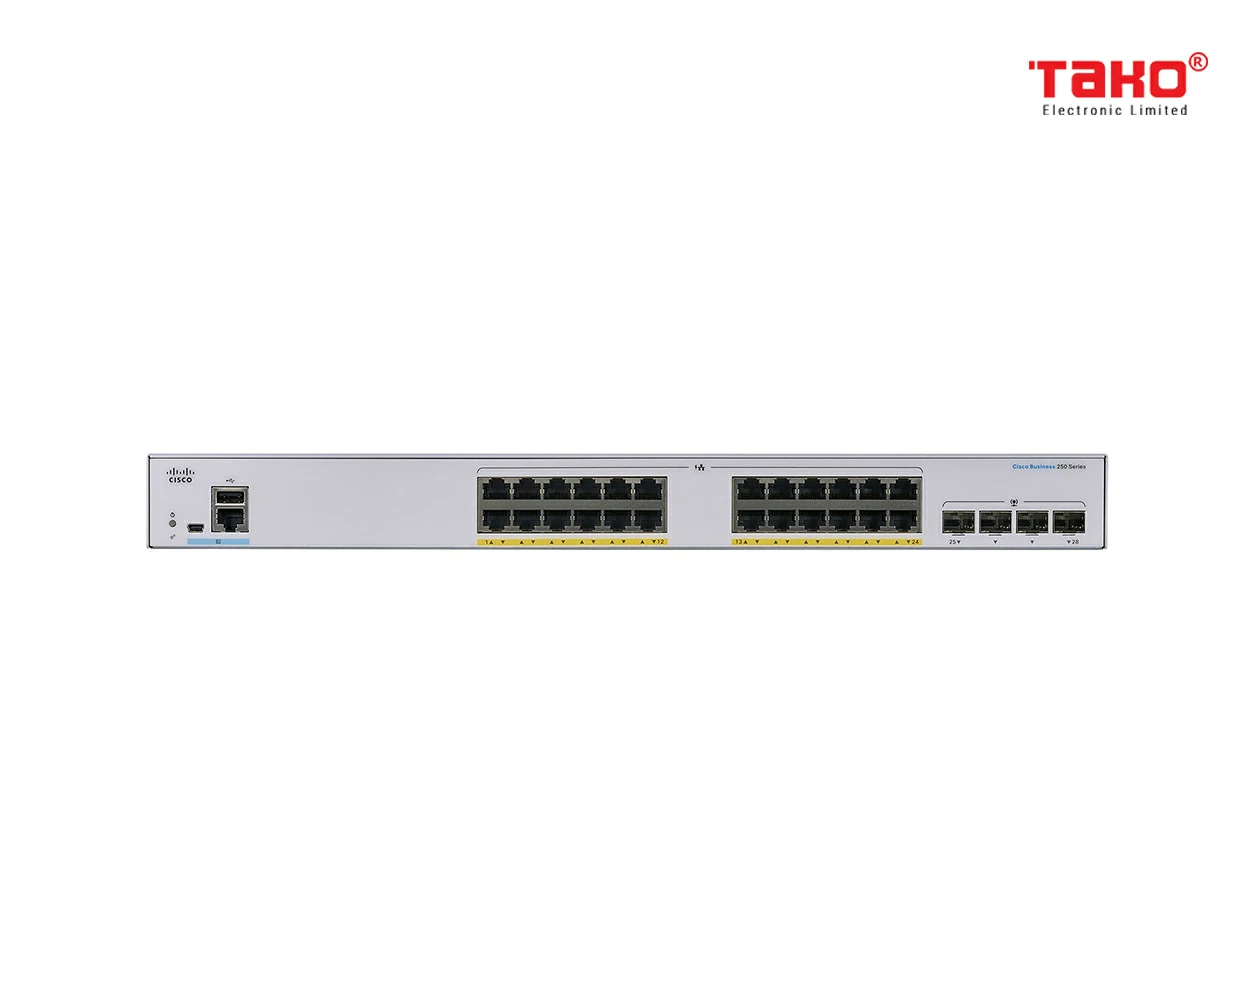 Cisco CBS250-24FP-4X 24 port 10/100/1000 Mbps PoE Layer 2 manageable web switch 4 x 10 Gbps SFP slots 3